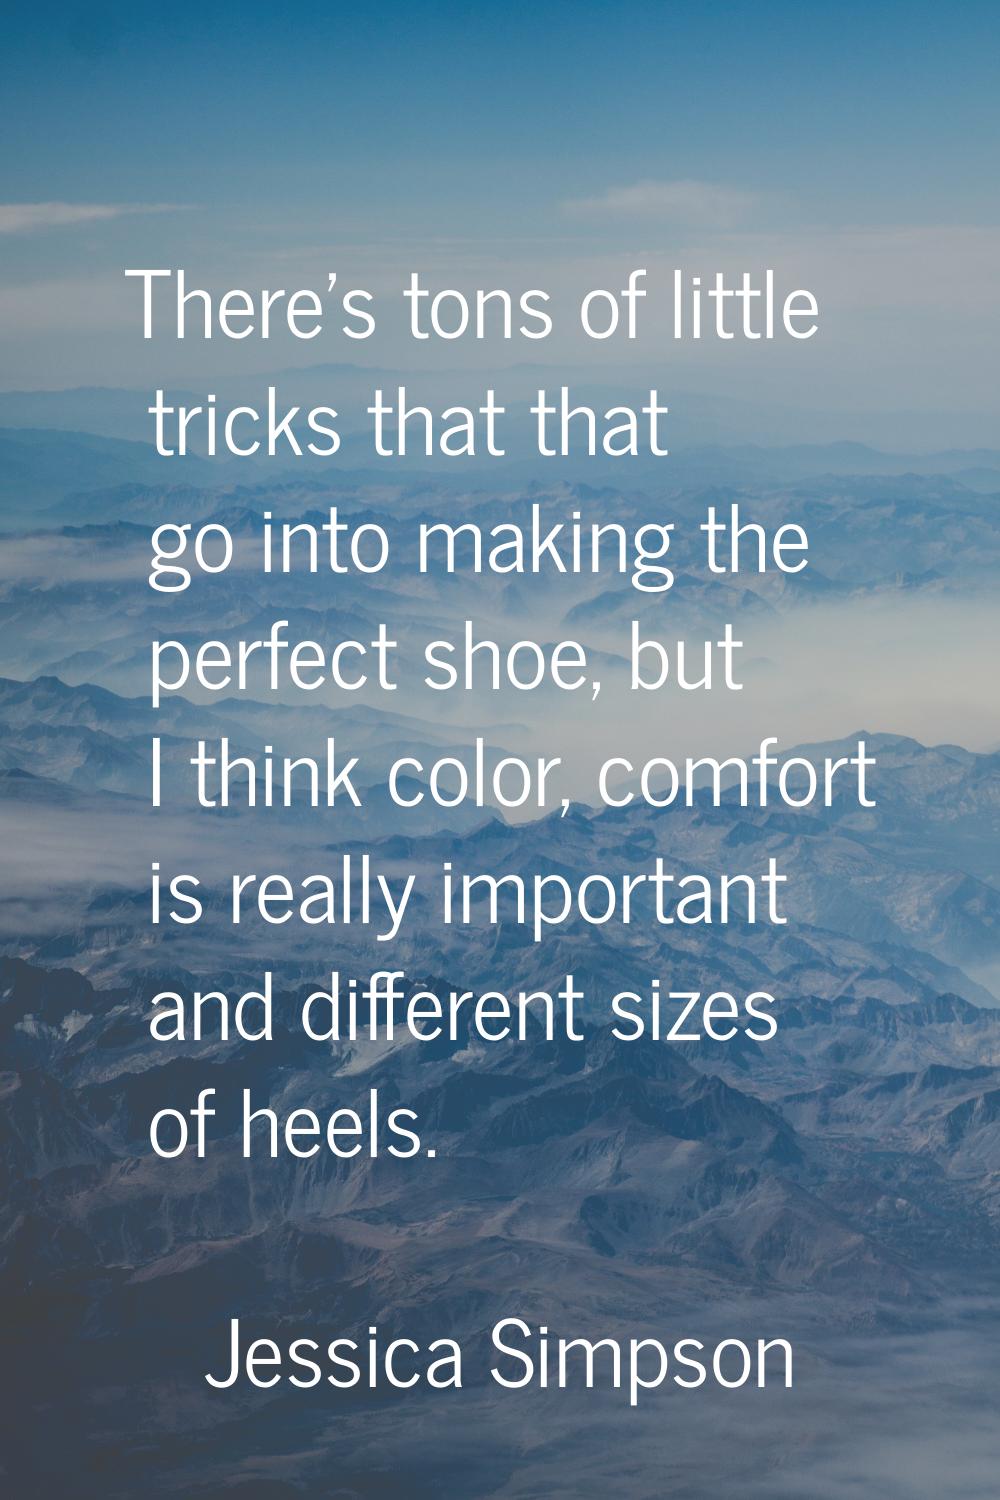 There's tons of little tricks that that go into making the perfect shoe, but I think color, comfort